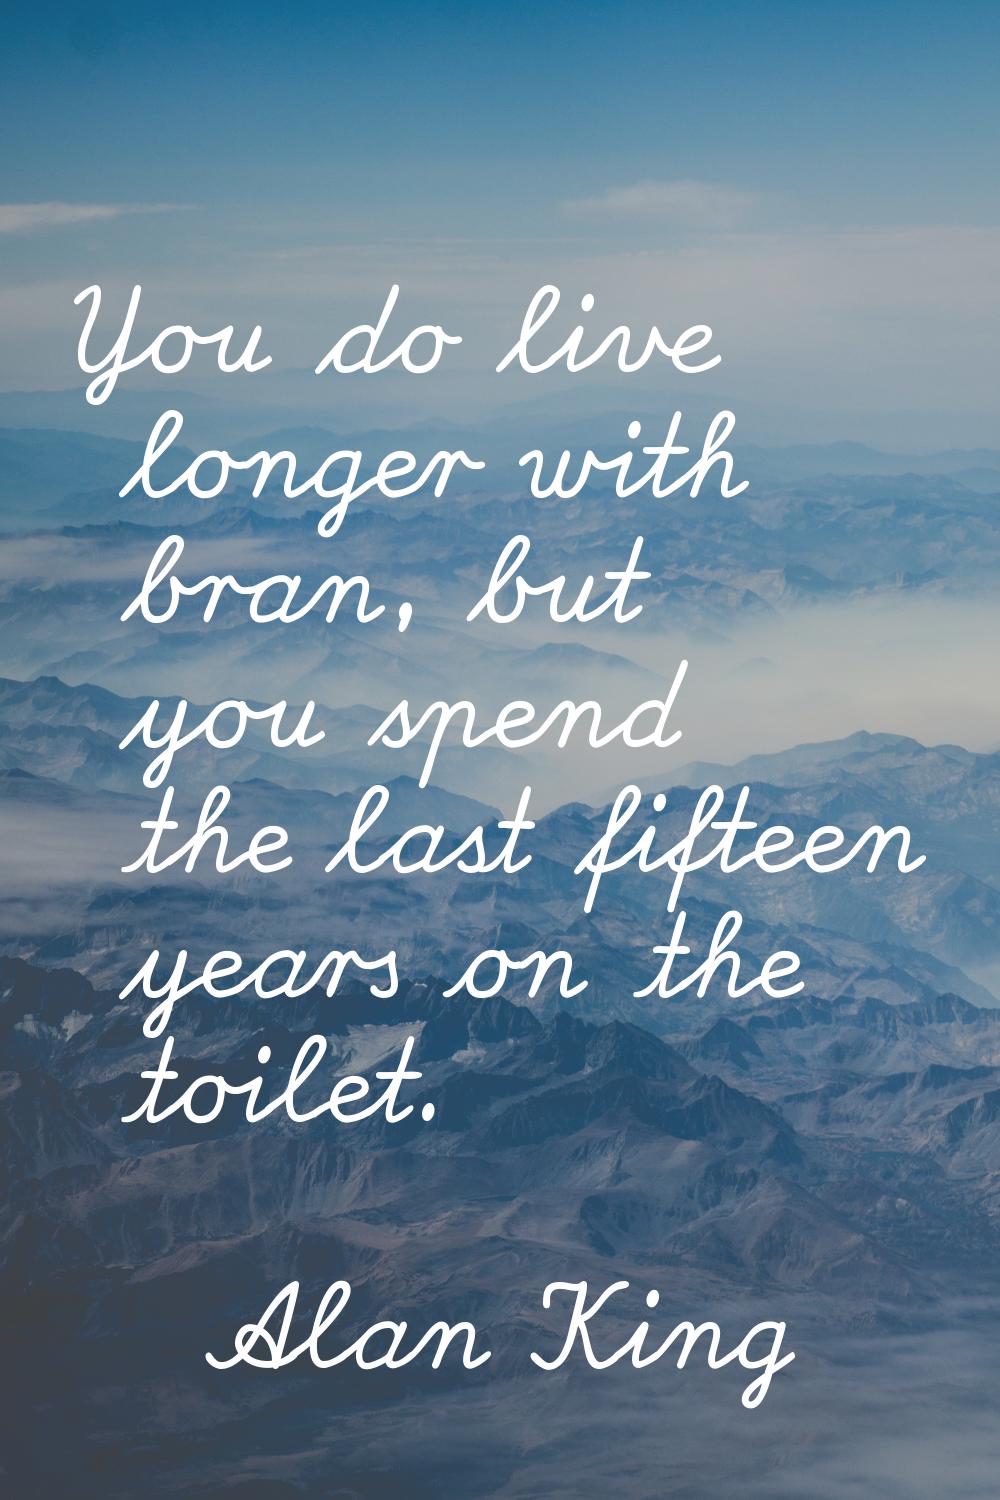 You do live longer with bran, but you spend the last fifteen years on the toilet.